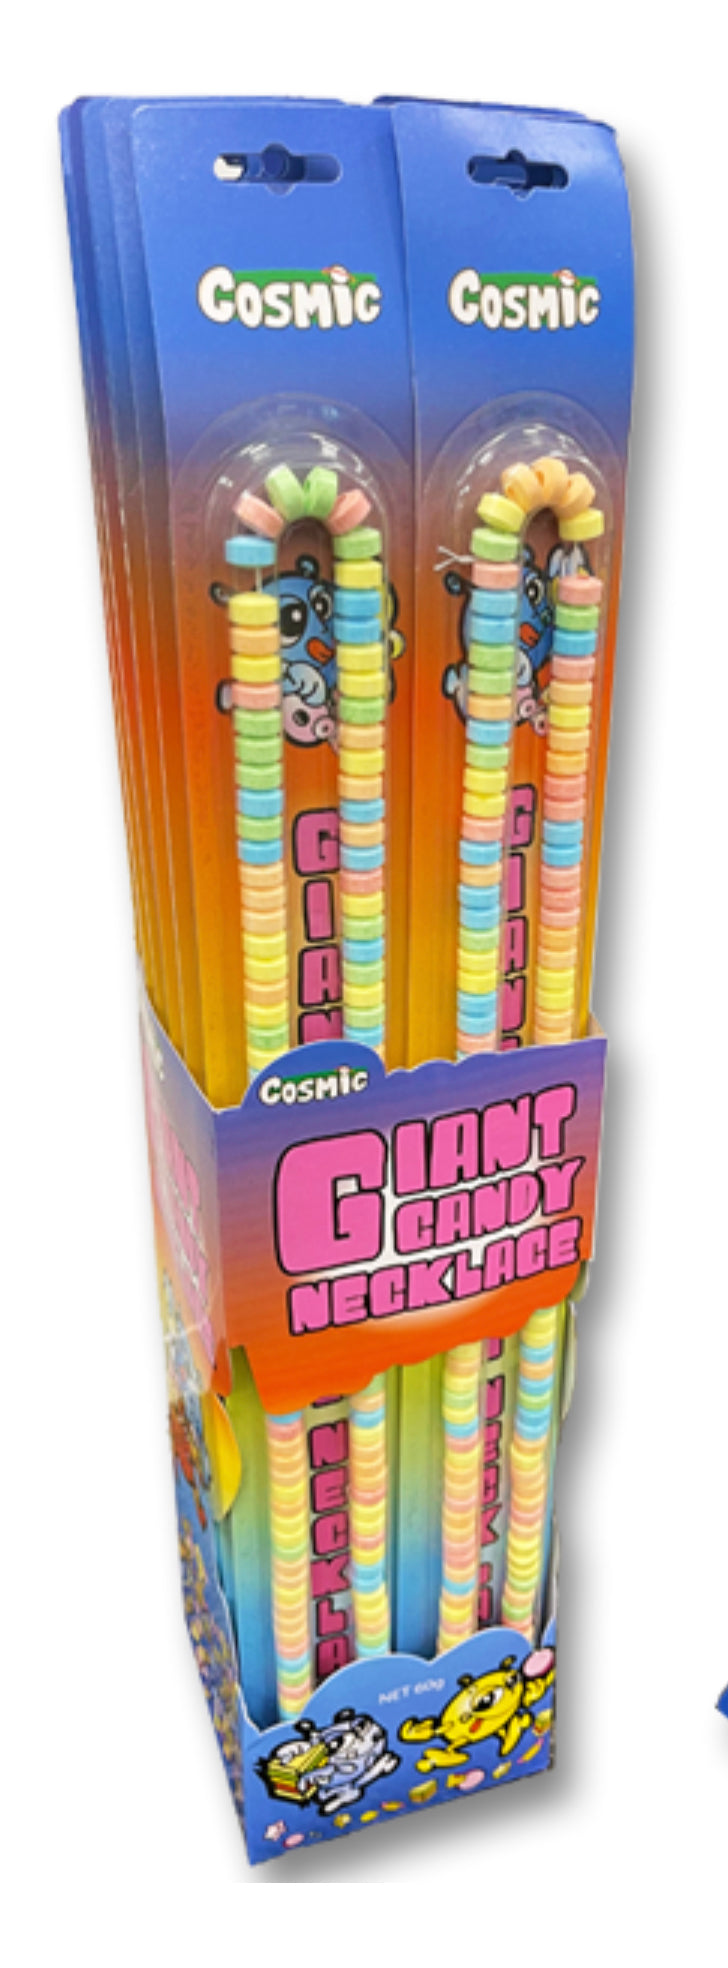 Cosmic Giant Candy Necklace - Each